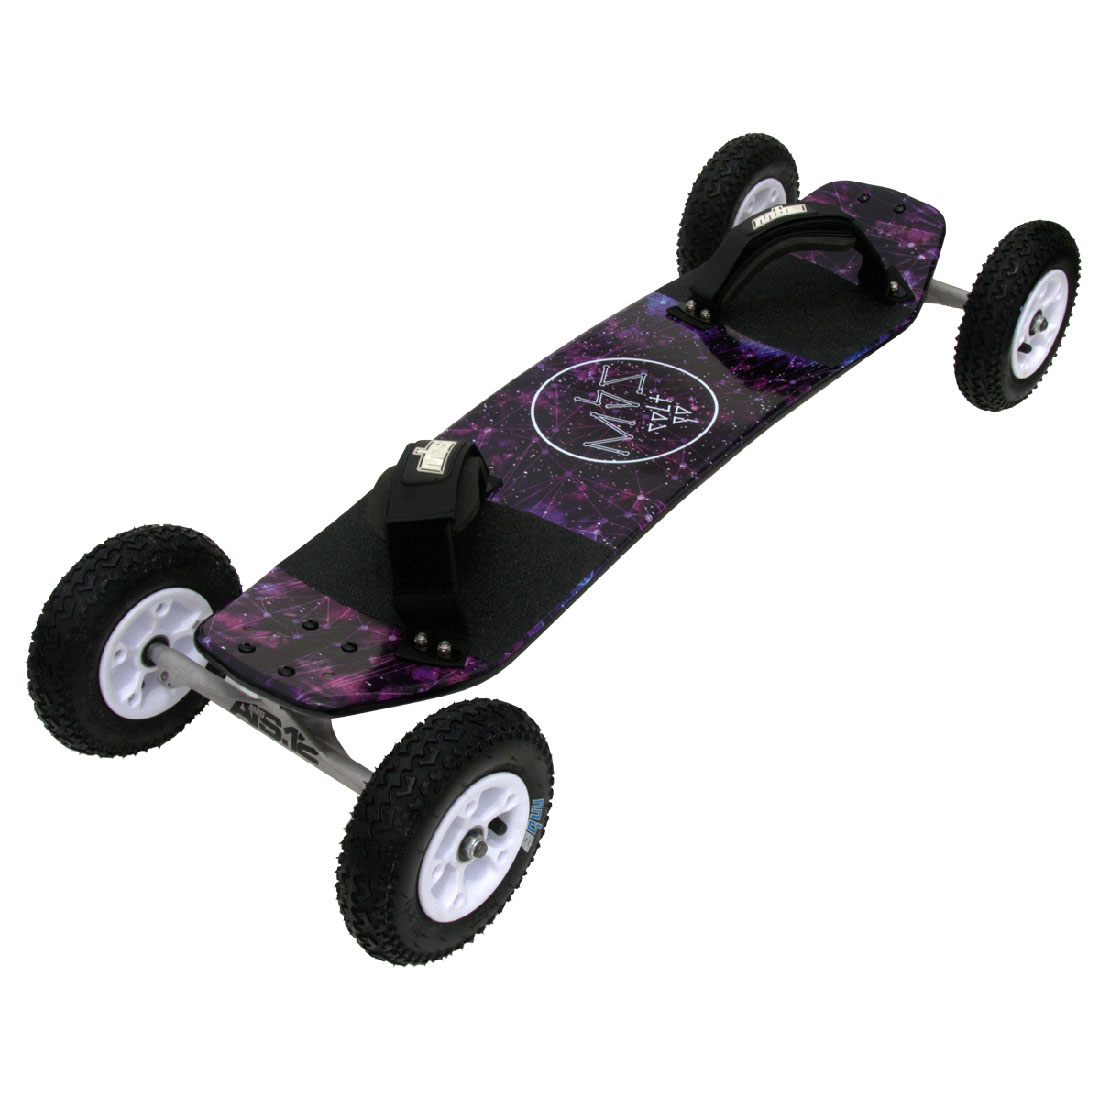 10101 - MBS Colt 90 Mountainboard - Constellation